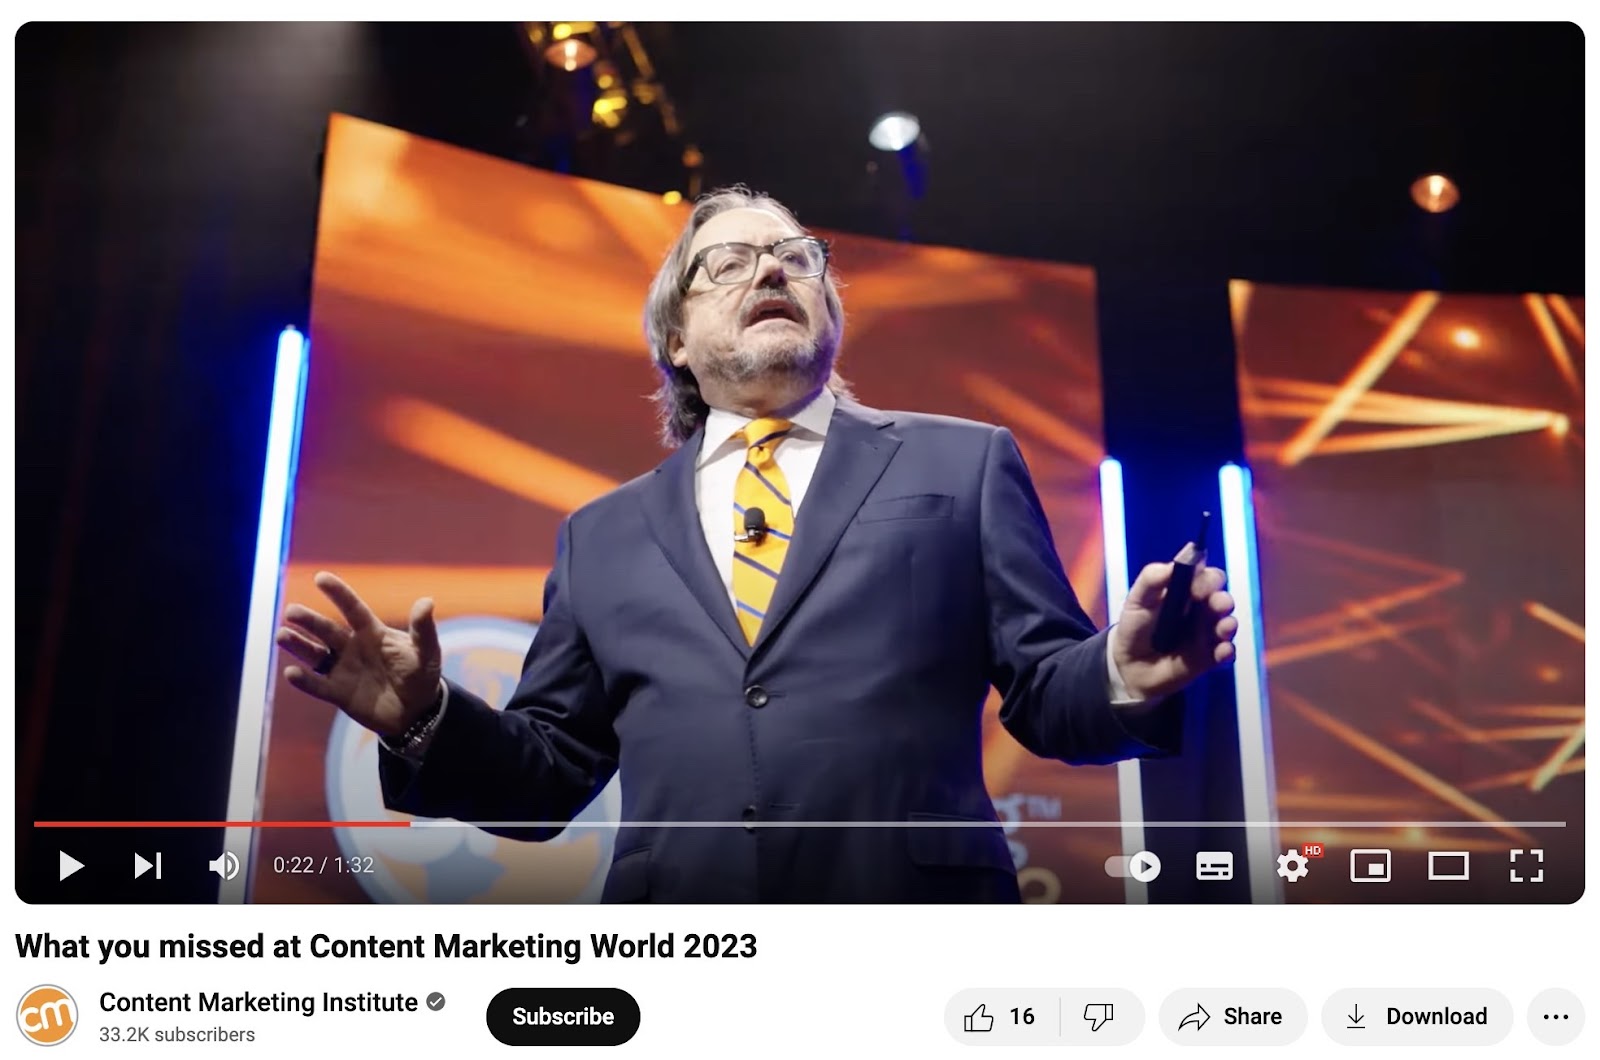 Content Marketing World's video connected  what users who were incapable  to be  missed